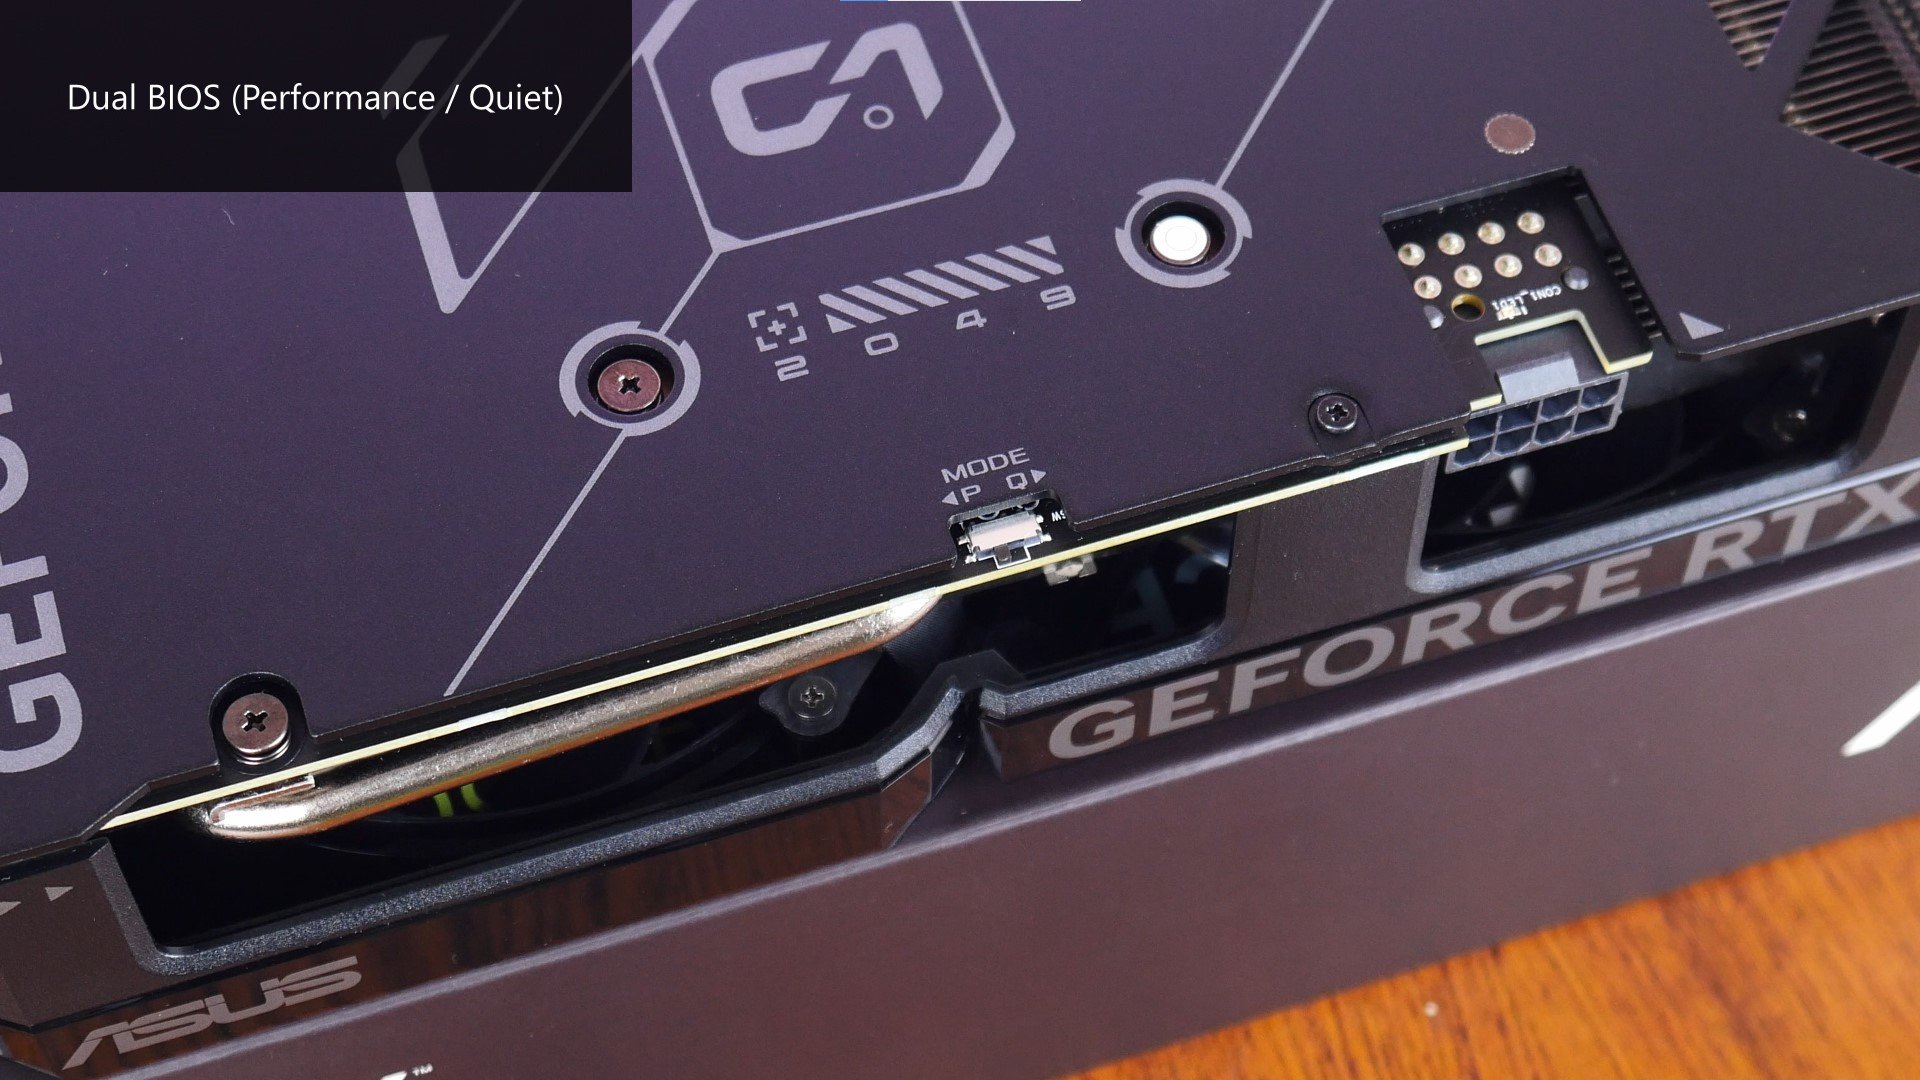 Review: ASUS Dual GeForce RTX 4060 OC Edition 8GB GDDR6 Graphics Card